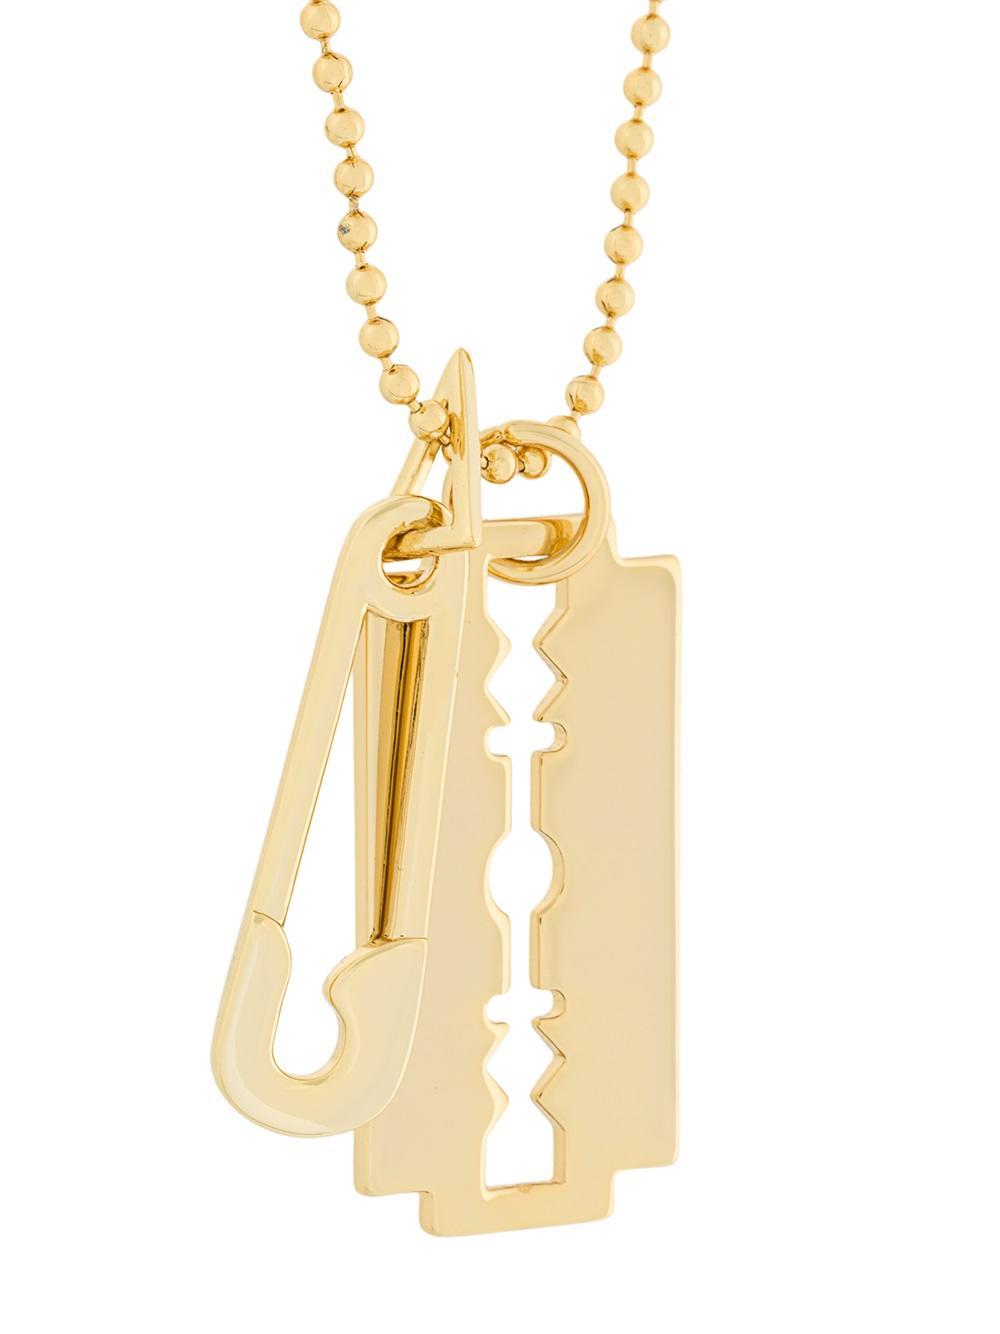 McQ Razor Blade And Safety Pin Necklace in Metallic